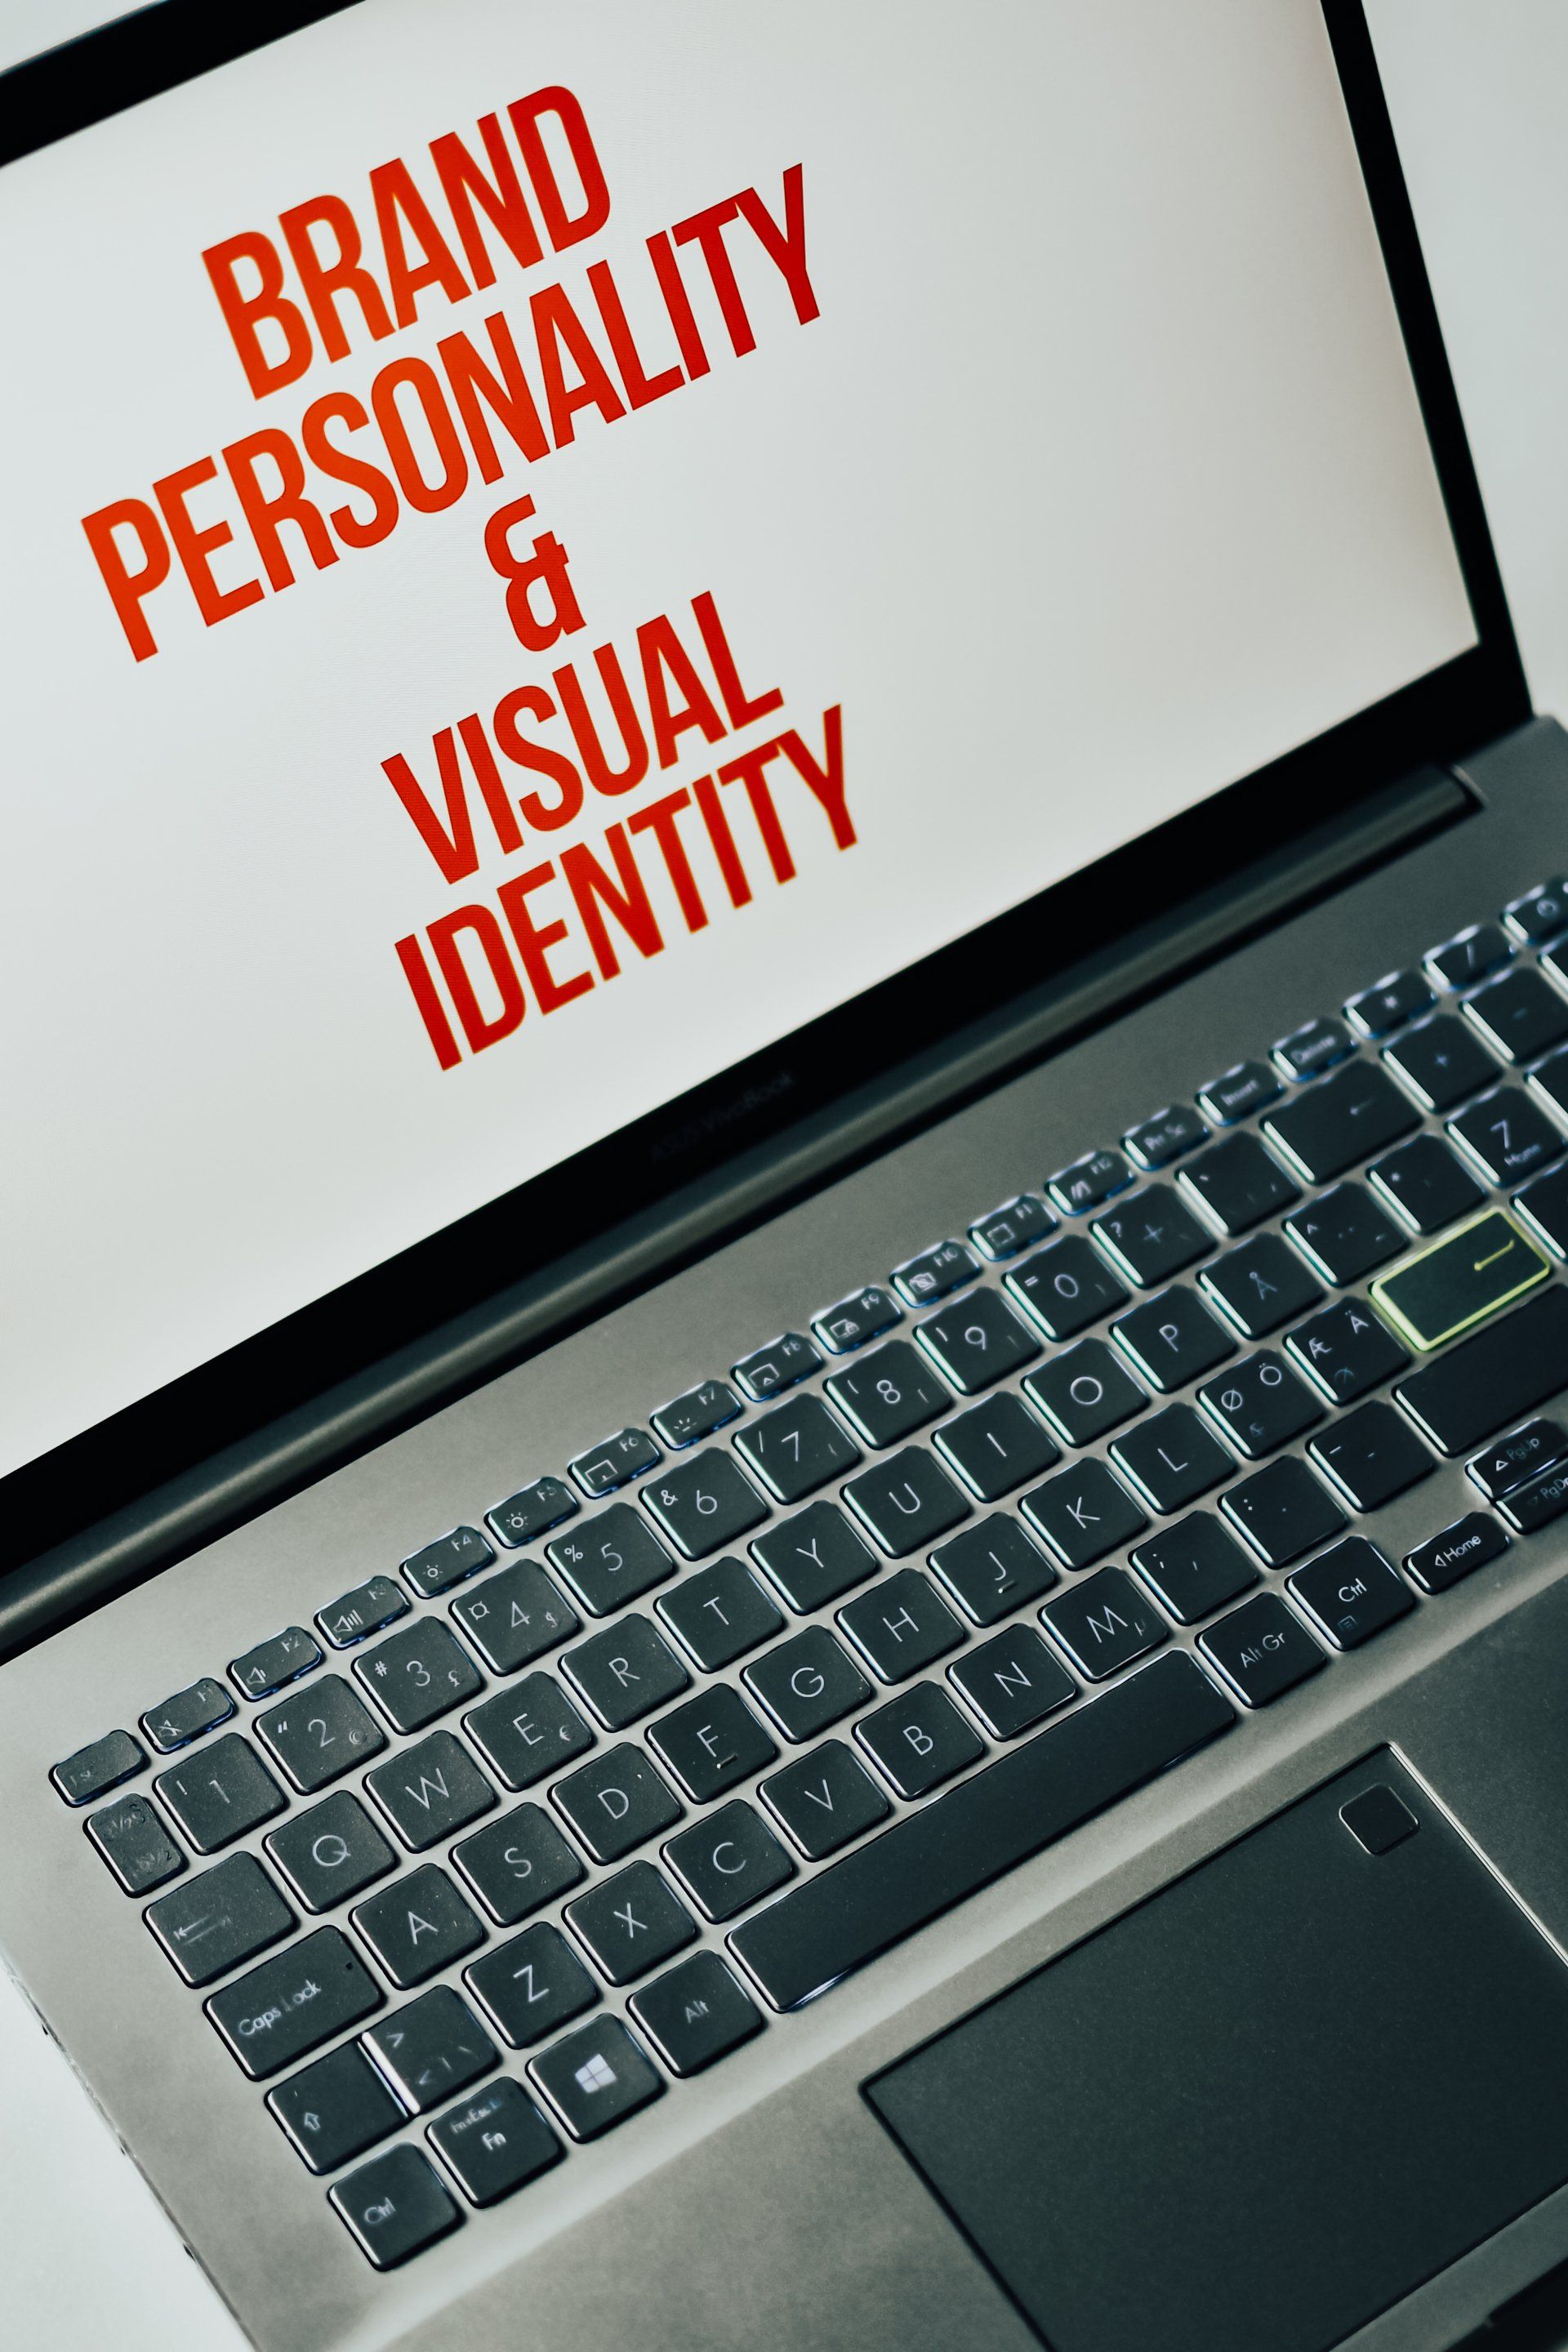 a laptop with a screen that says brand personality and visual identity